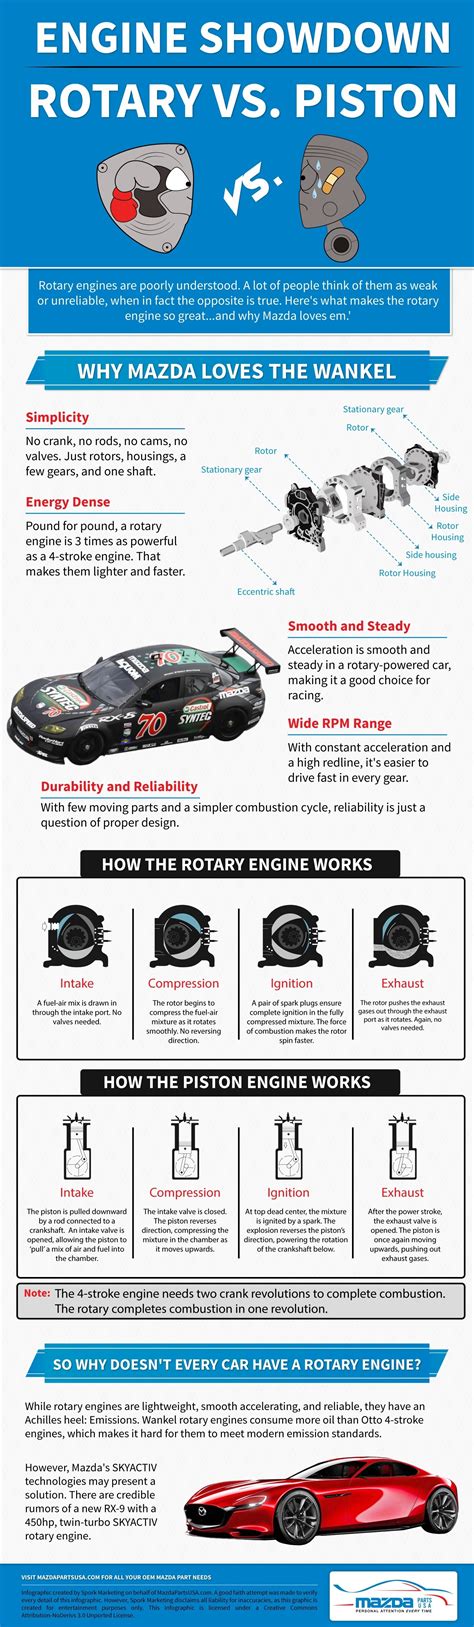 The Case for the Rotary Engine